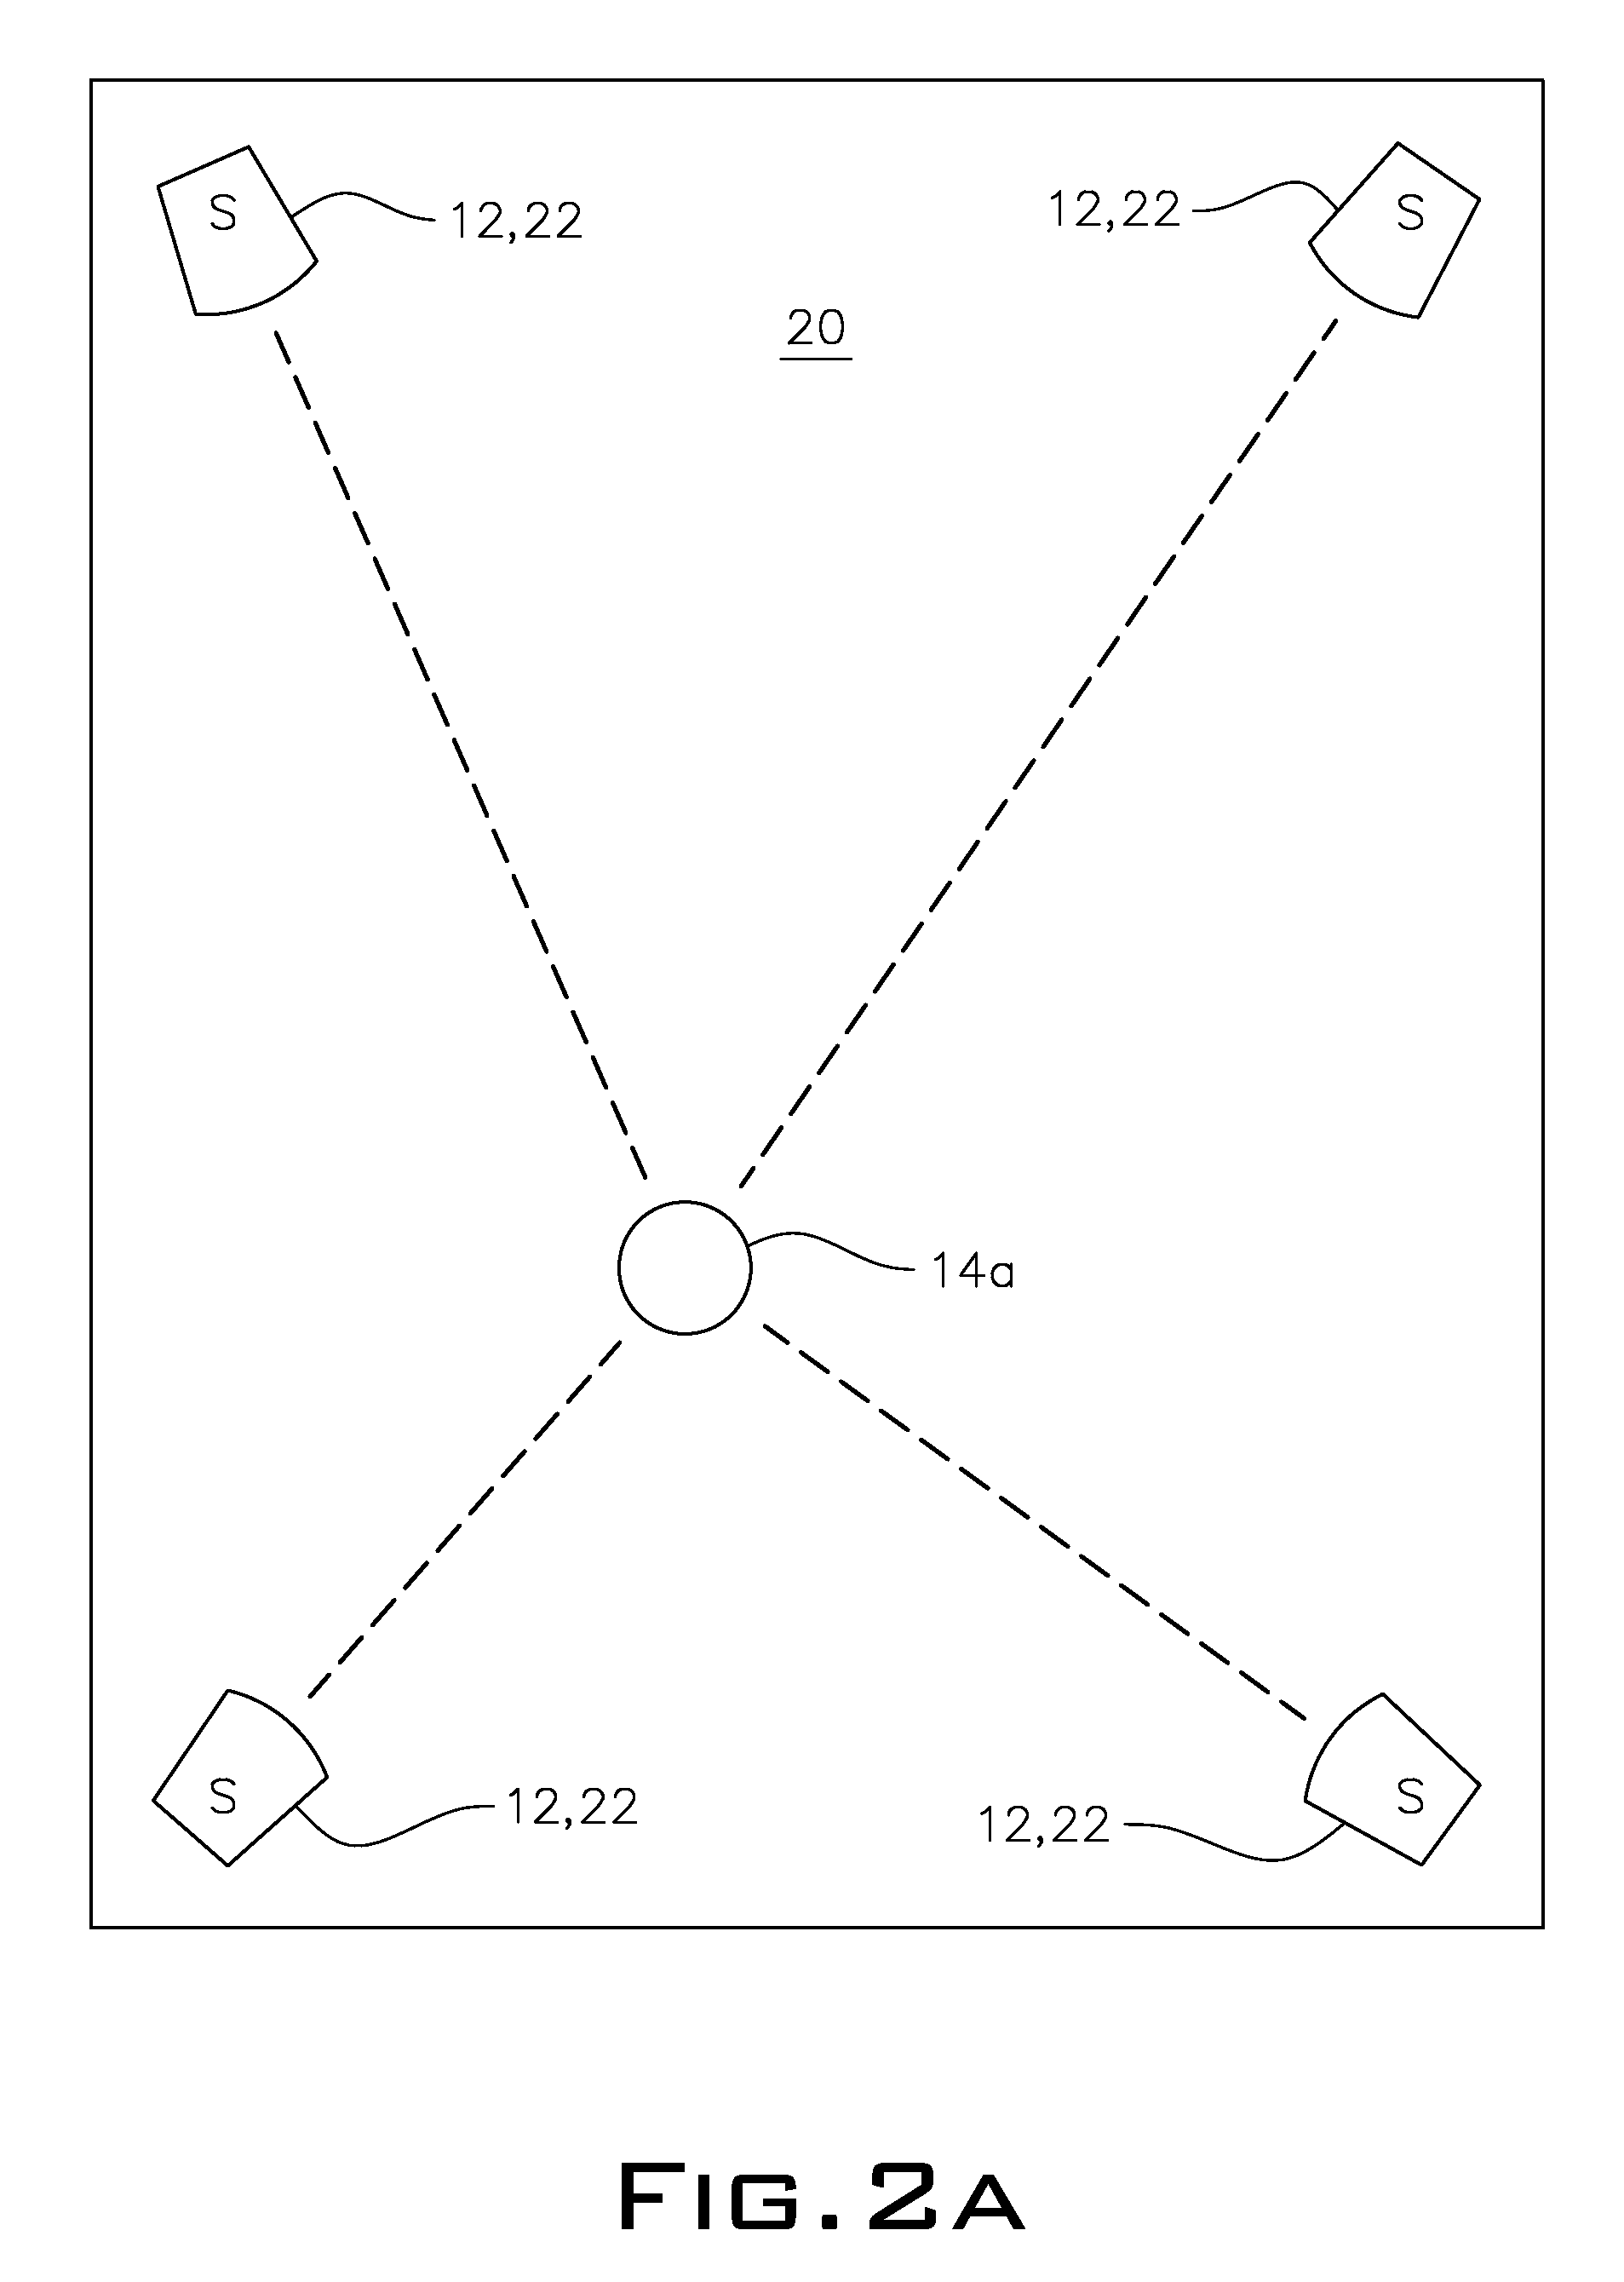 System and method for providing focused directional sound in an audio system